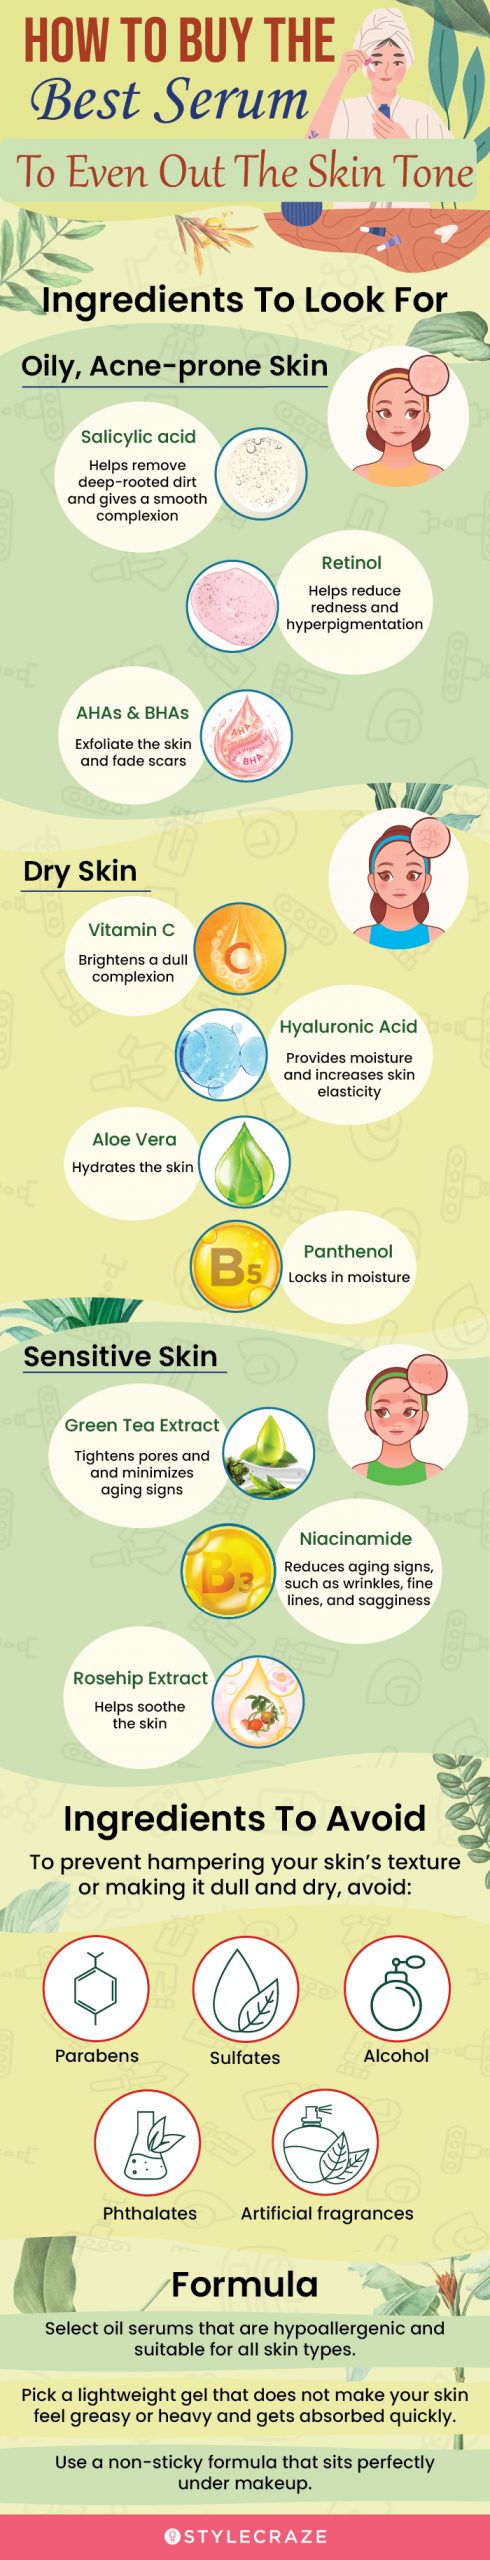 How To Buy The Best Serum To Even Out The Skin Ton  [infographic]